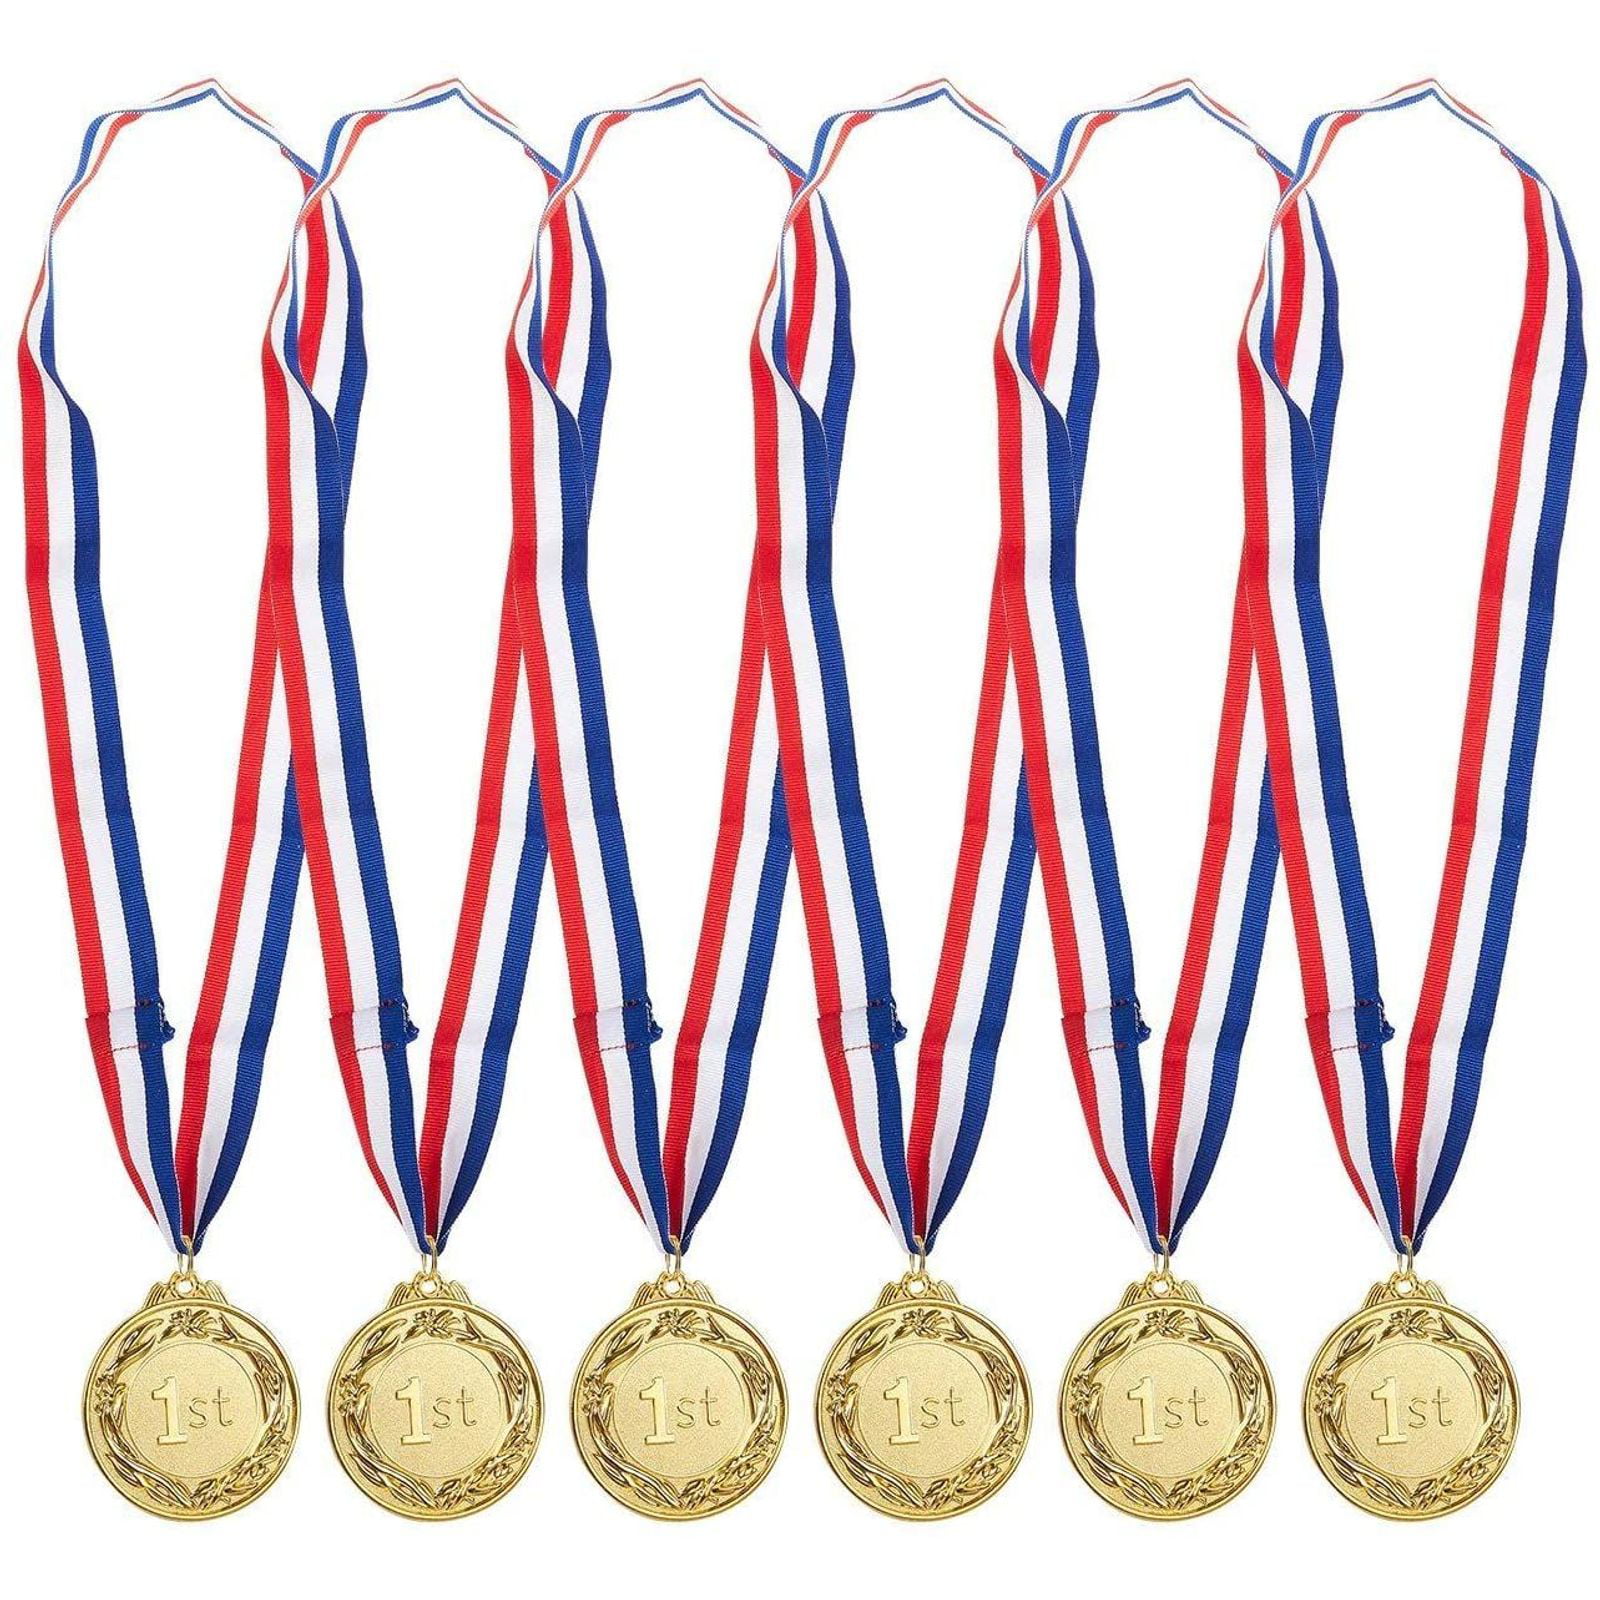 INSERTS or OWN LOGO PACK OF 10 SPELLING SCHOOL STAR METAL MEDALS 50mm RIBBONS 